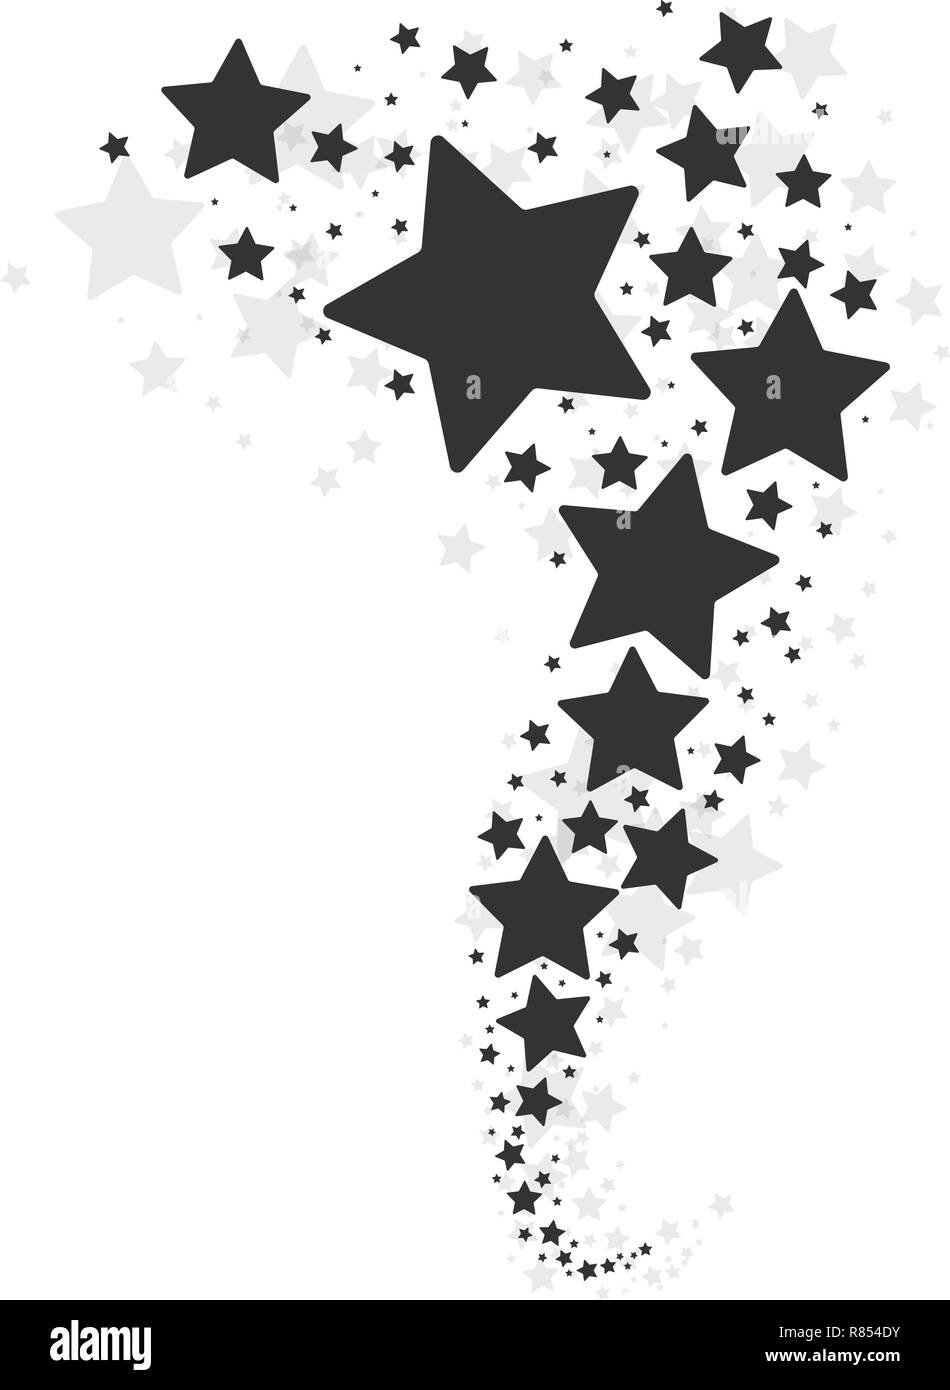 Star Design Tattoos Isolated On A White Background. Vector Illustration. Stock Vector